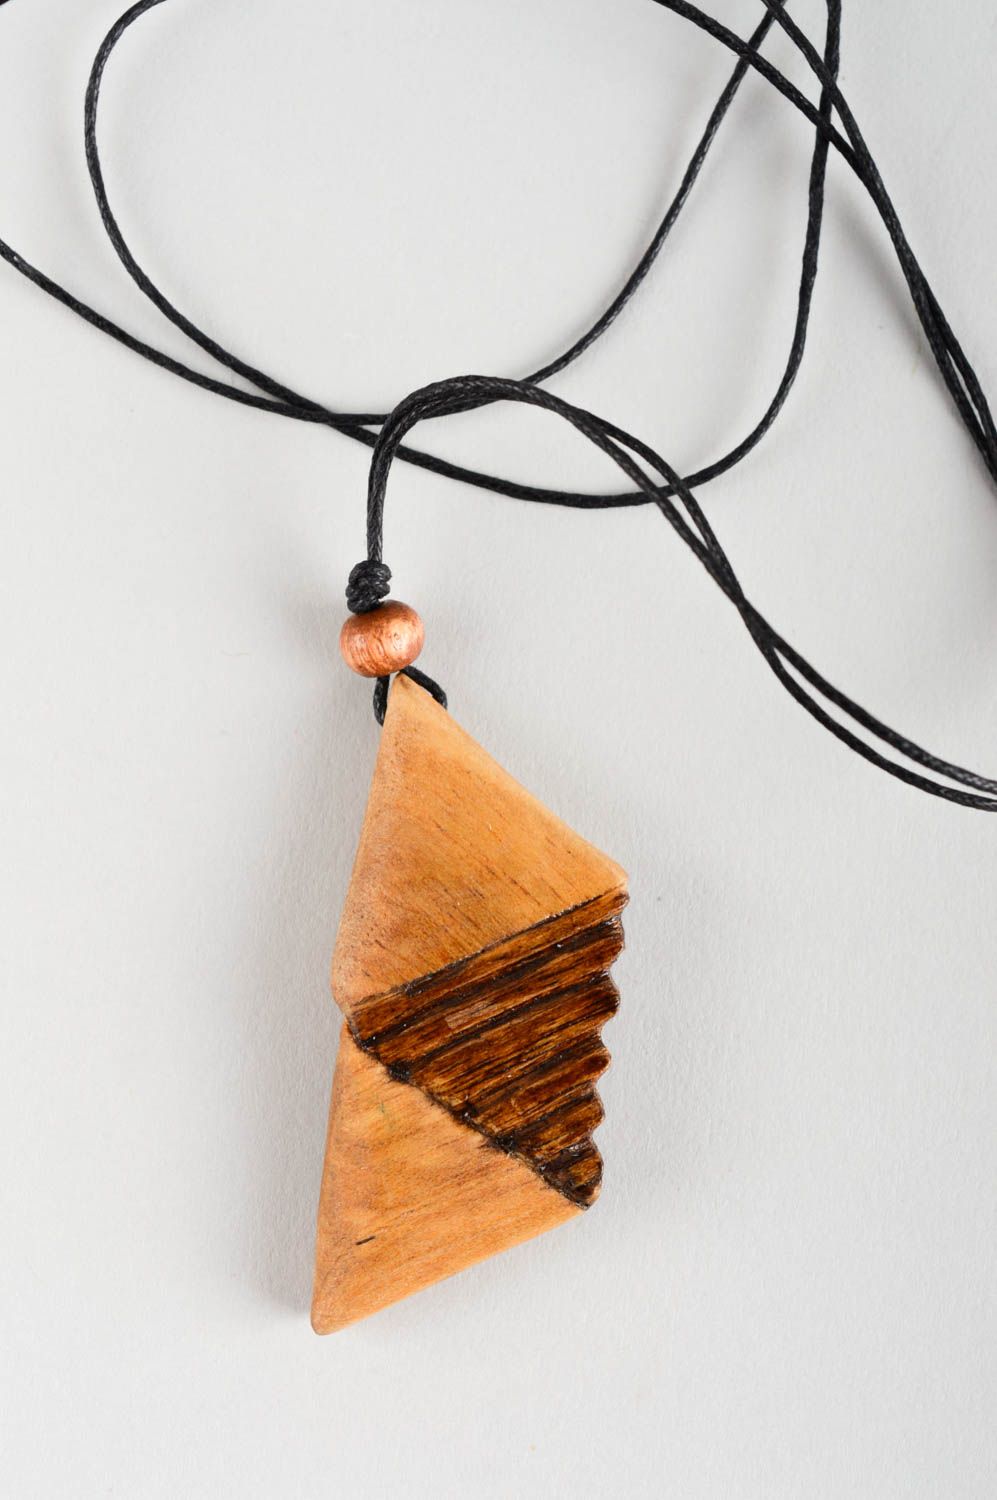 Stylish handmade wooden pendant artisan jewelry designs wood craft gifts for her photo 2